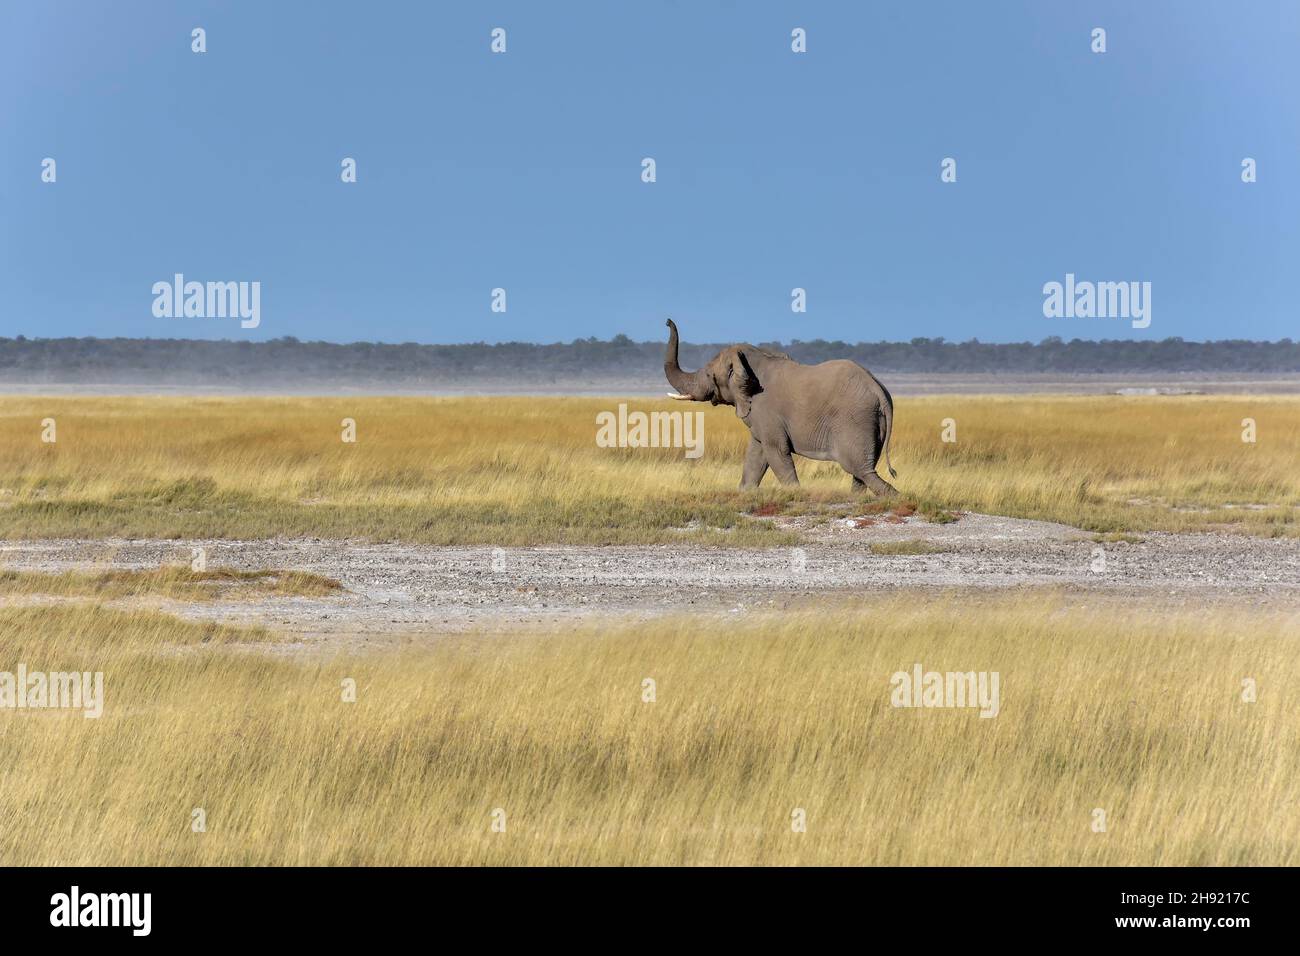 An impressive and determined male elephant walking to the left in tall grass against the horizon at Etosha Namibia smelling with it trunk elevated up Stock Photo